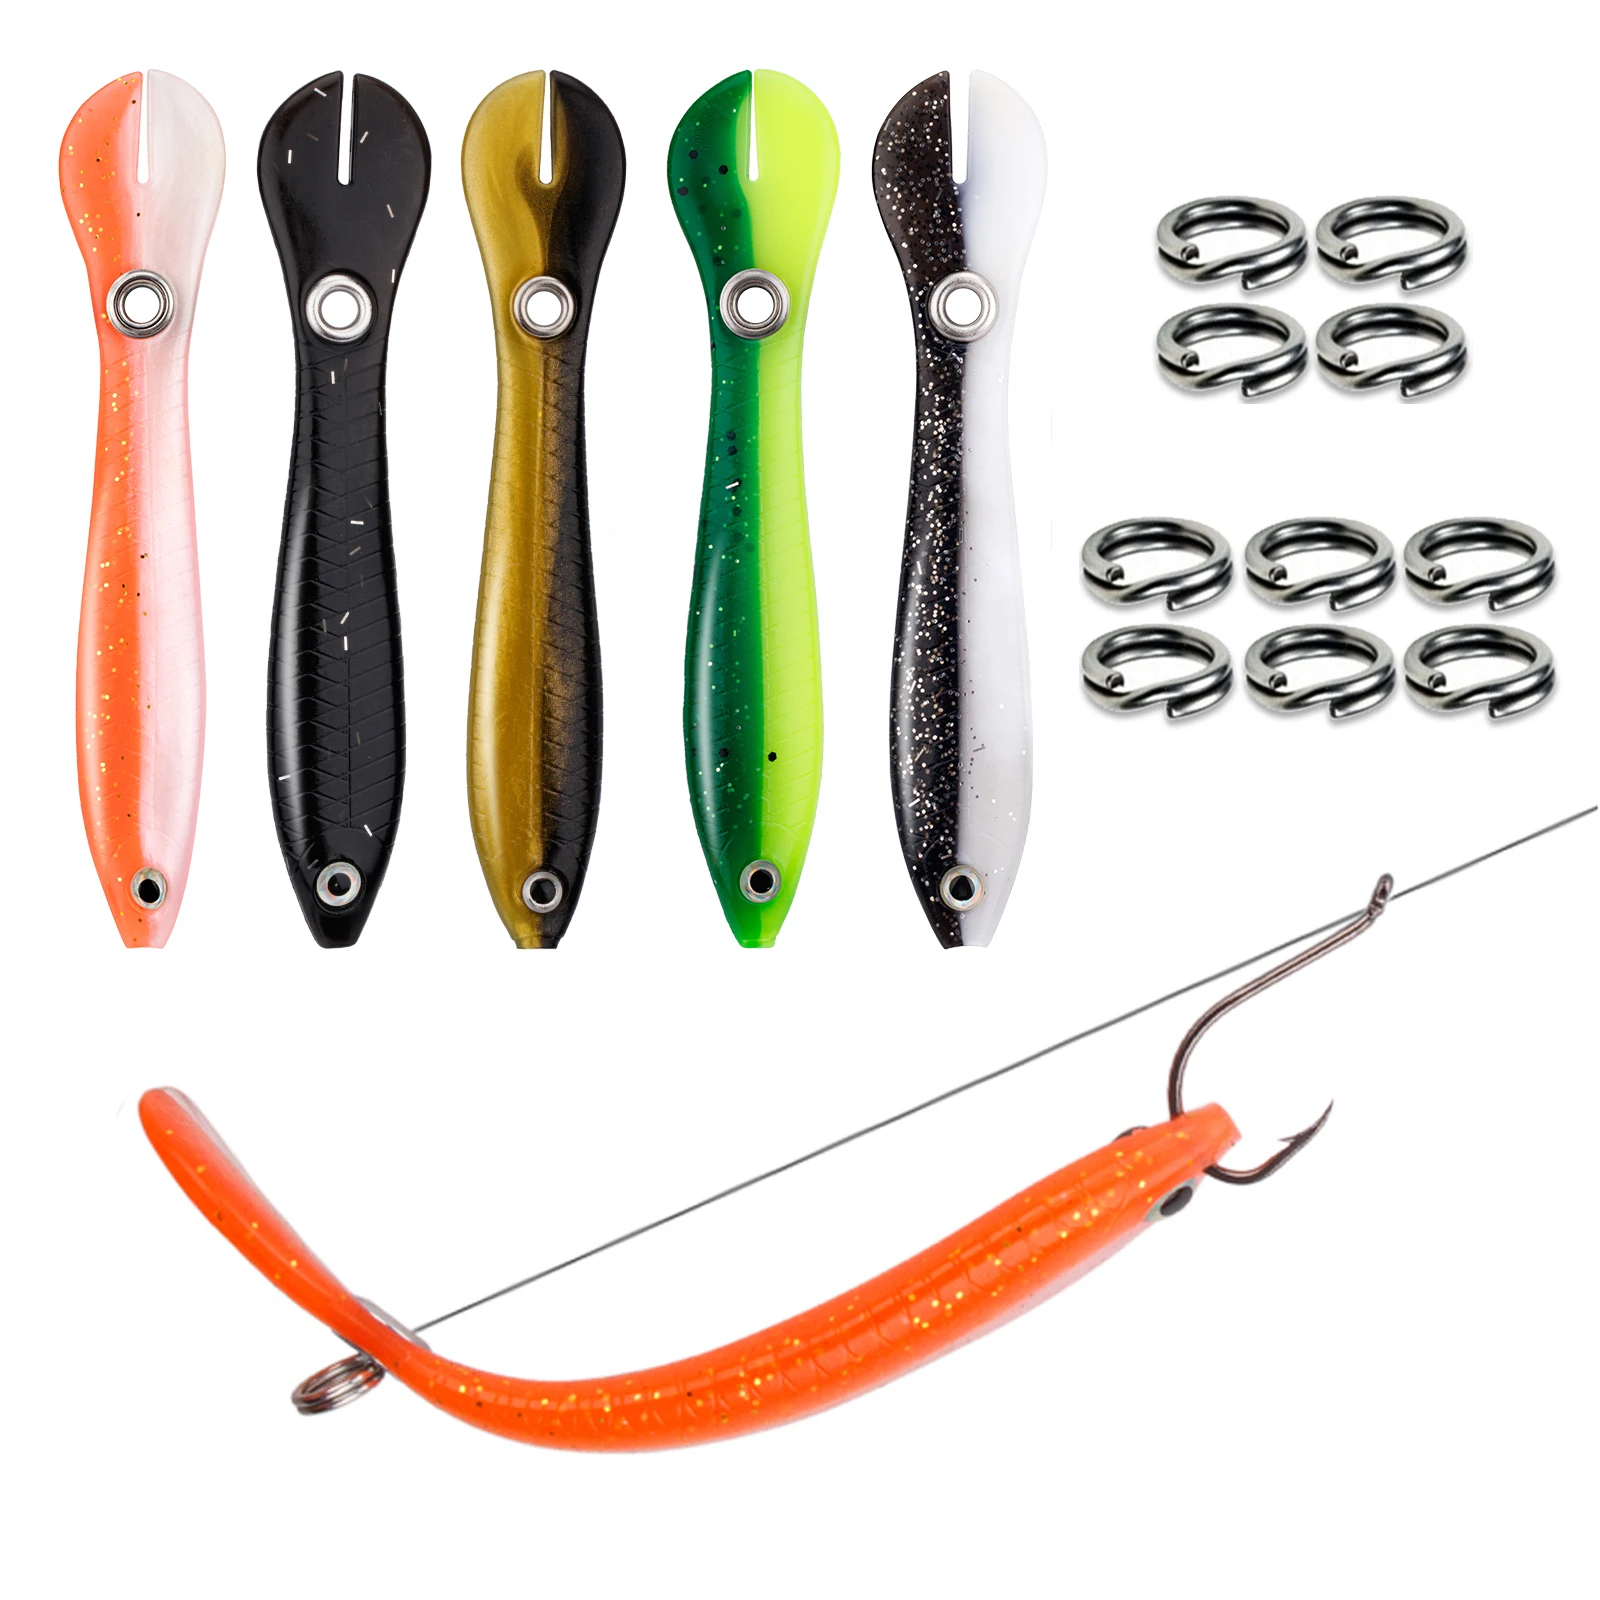 https://ae01.alicdn.com/kf/S483f5885faf046689deb8e4f7f2cbbd8u/1PCS-Soft-bait-100mm-6-5g-Bionic-fish-Lure-Dying-Fish-Rubber-Shad-Artificial-Bait-Twitching.jpg